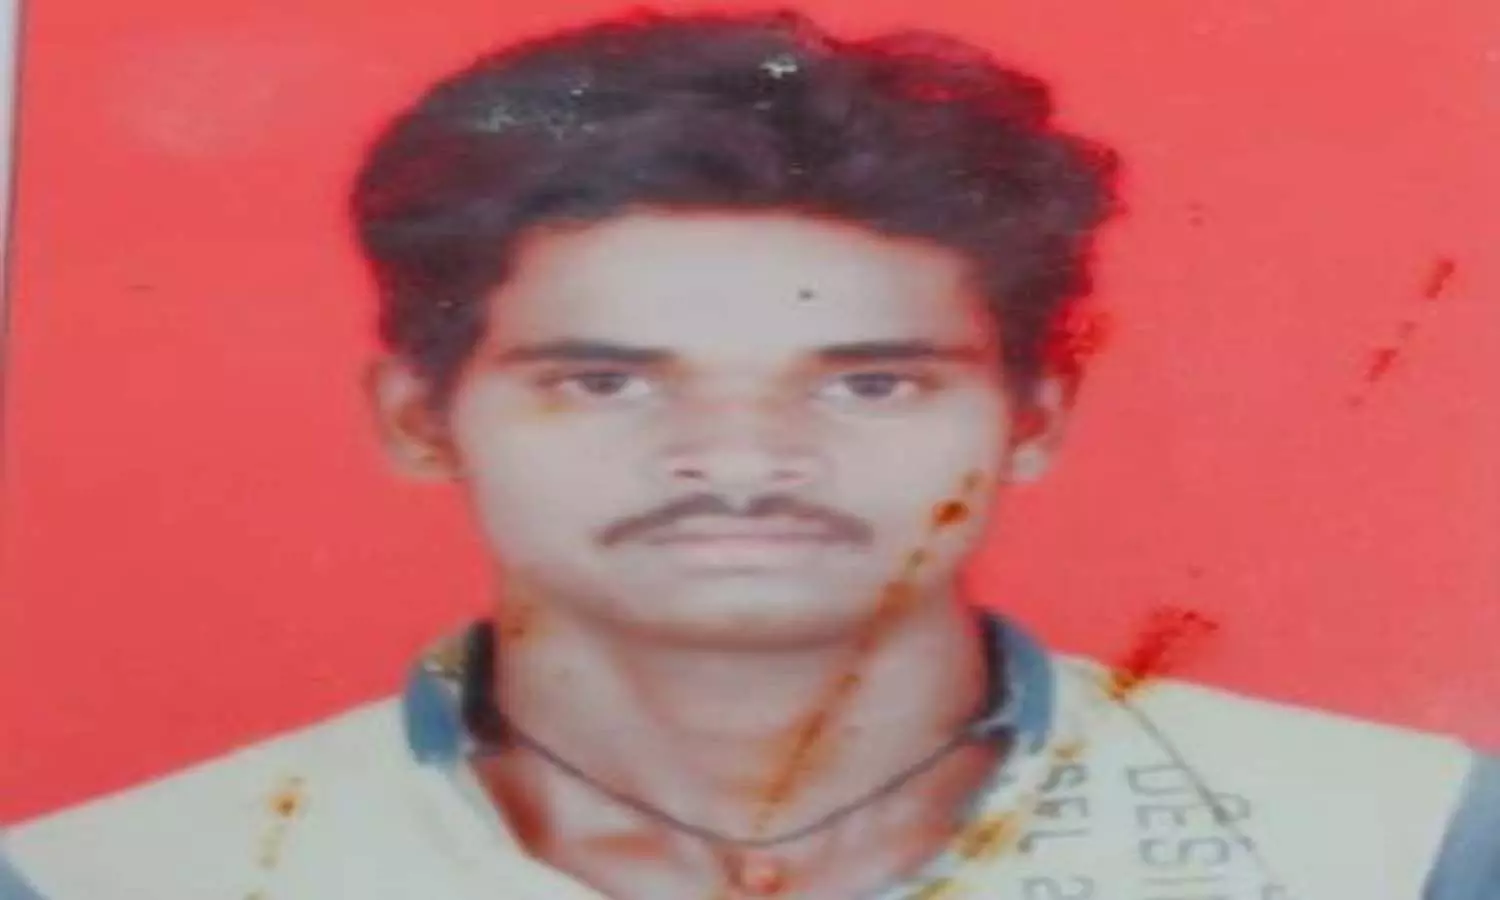 A young man died due to electrocution while going to defecate in the field in Fatehpur.